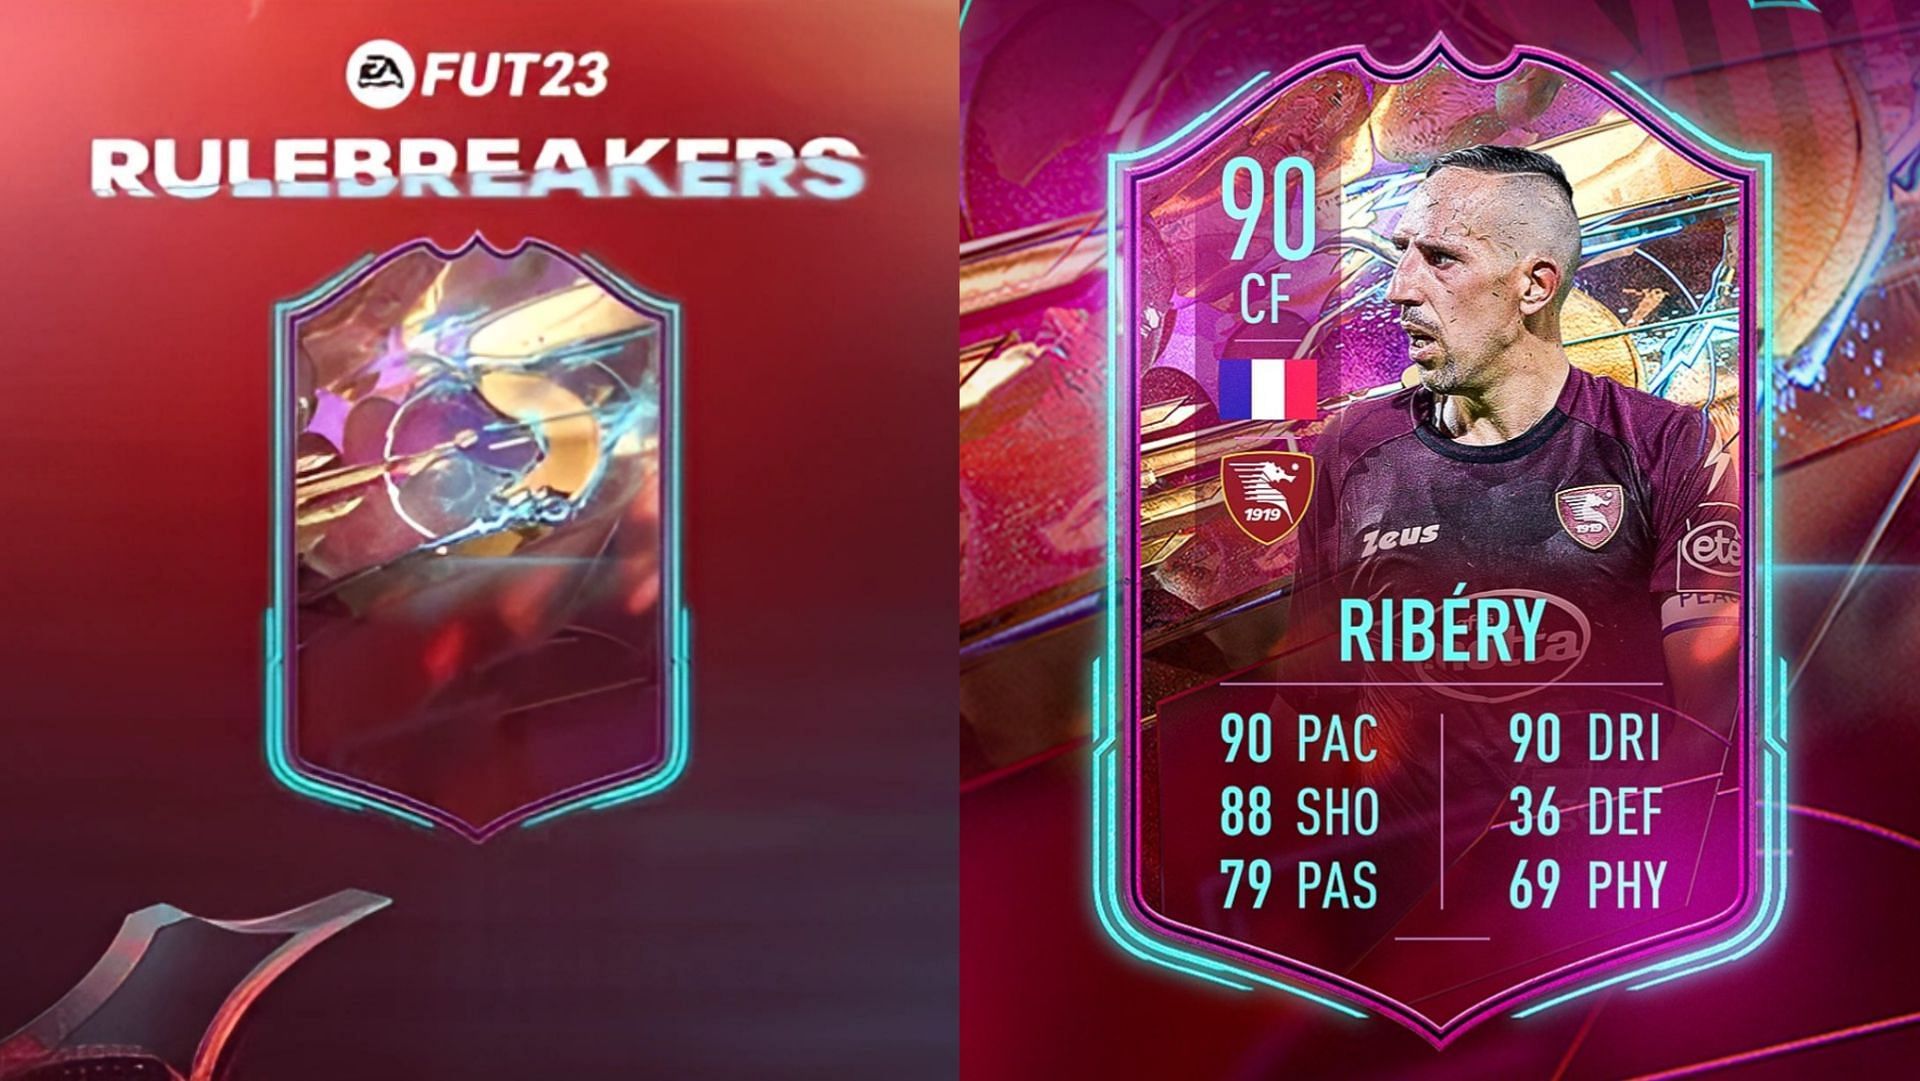 More leaks have surfaced about the upcoming promo (Images via Twitter/FUT Sheriff)